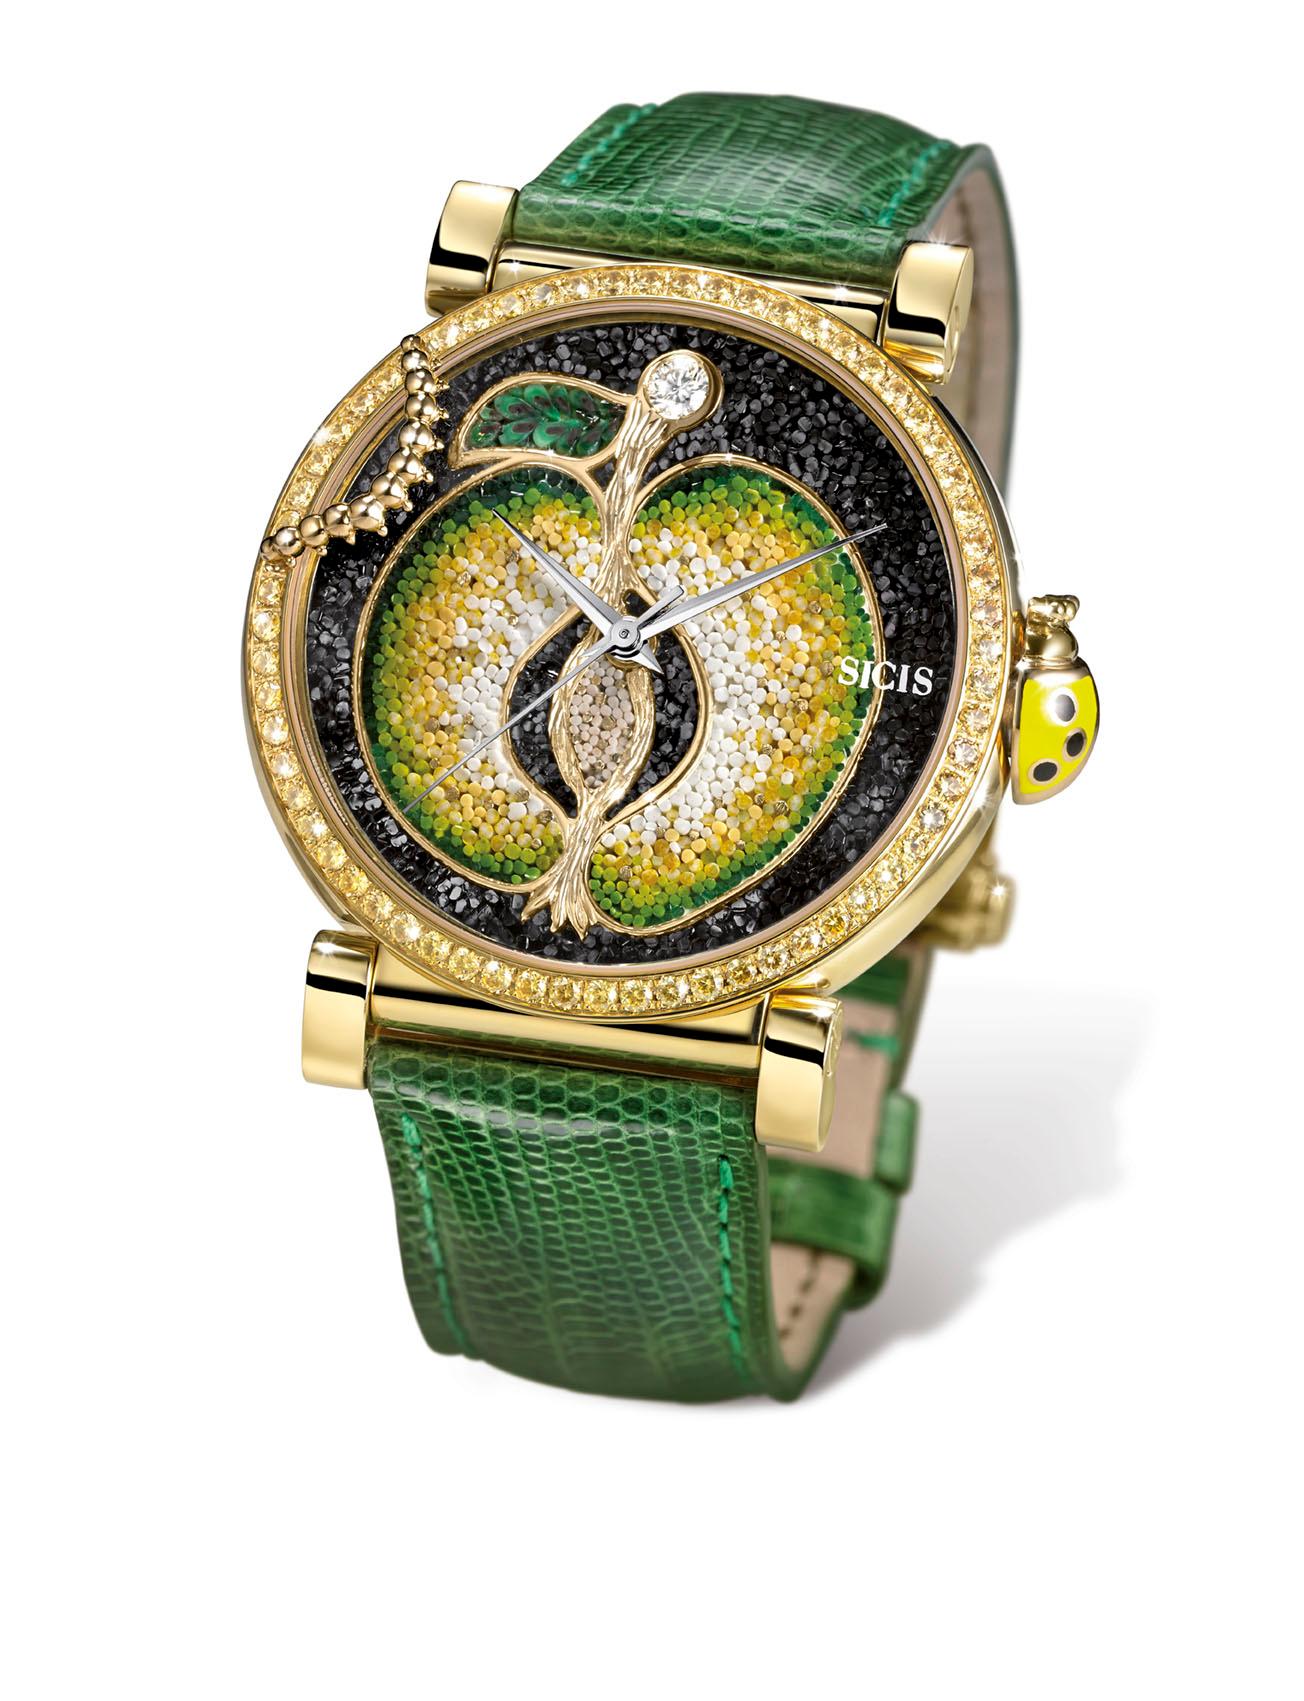 Modern Watch Yellow Gold White Diamond Sapphires Lizard Strap Handdecorated Micromosaic For Sale